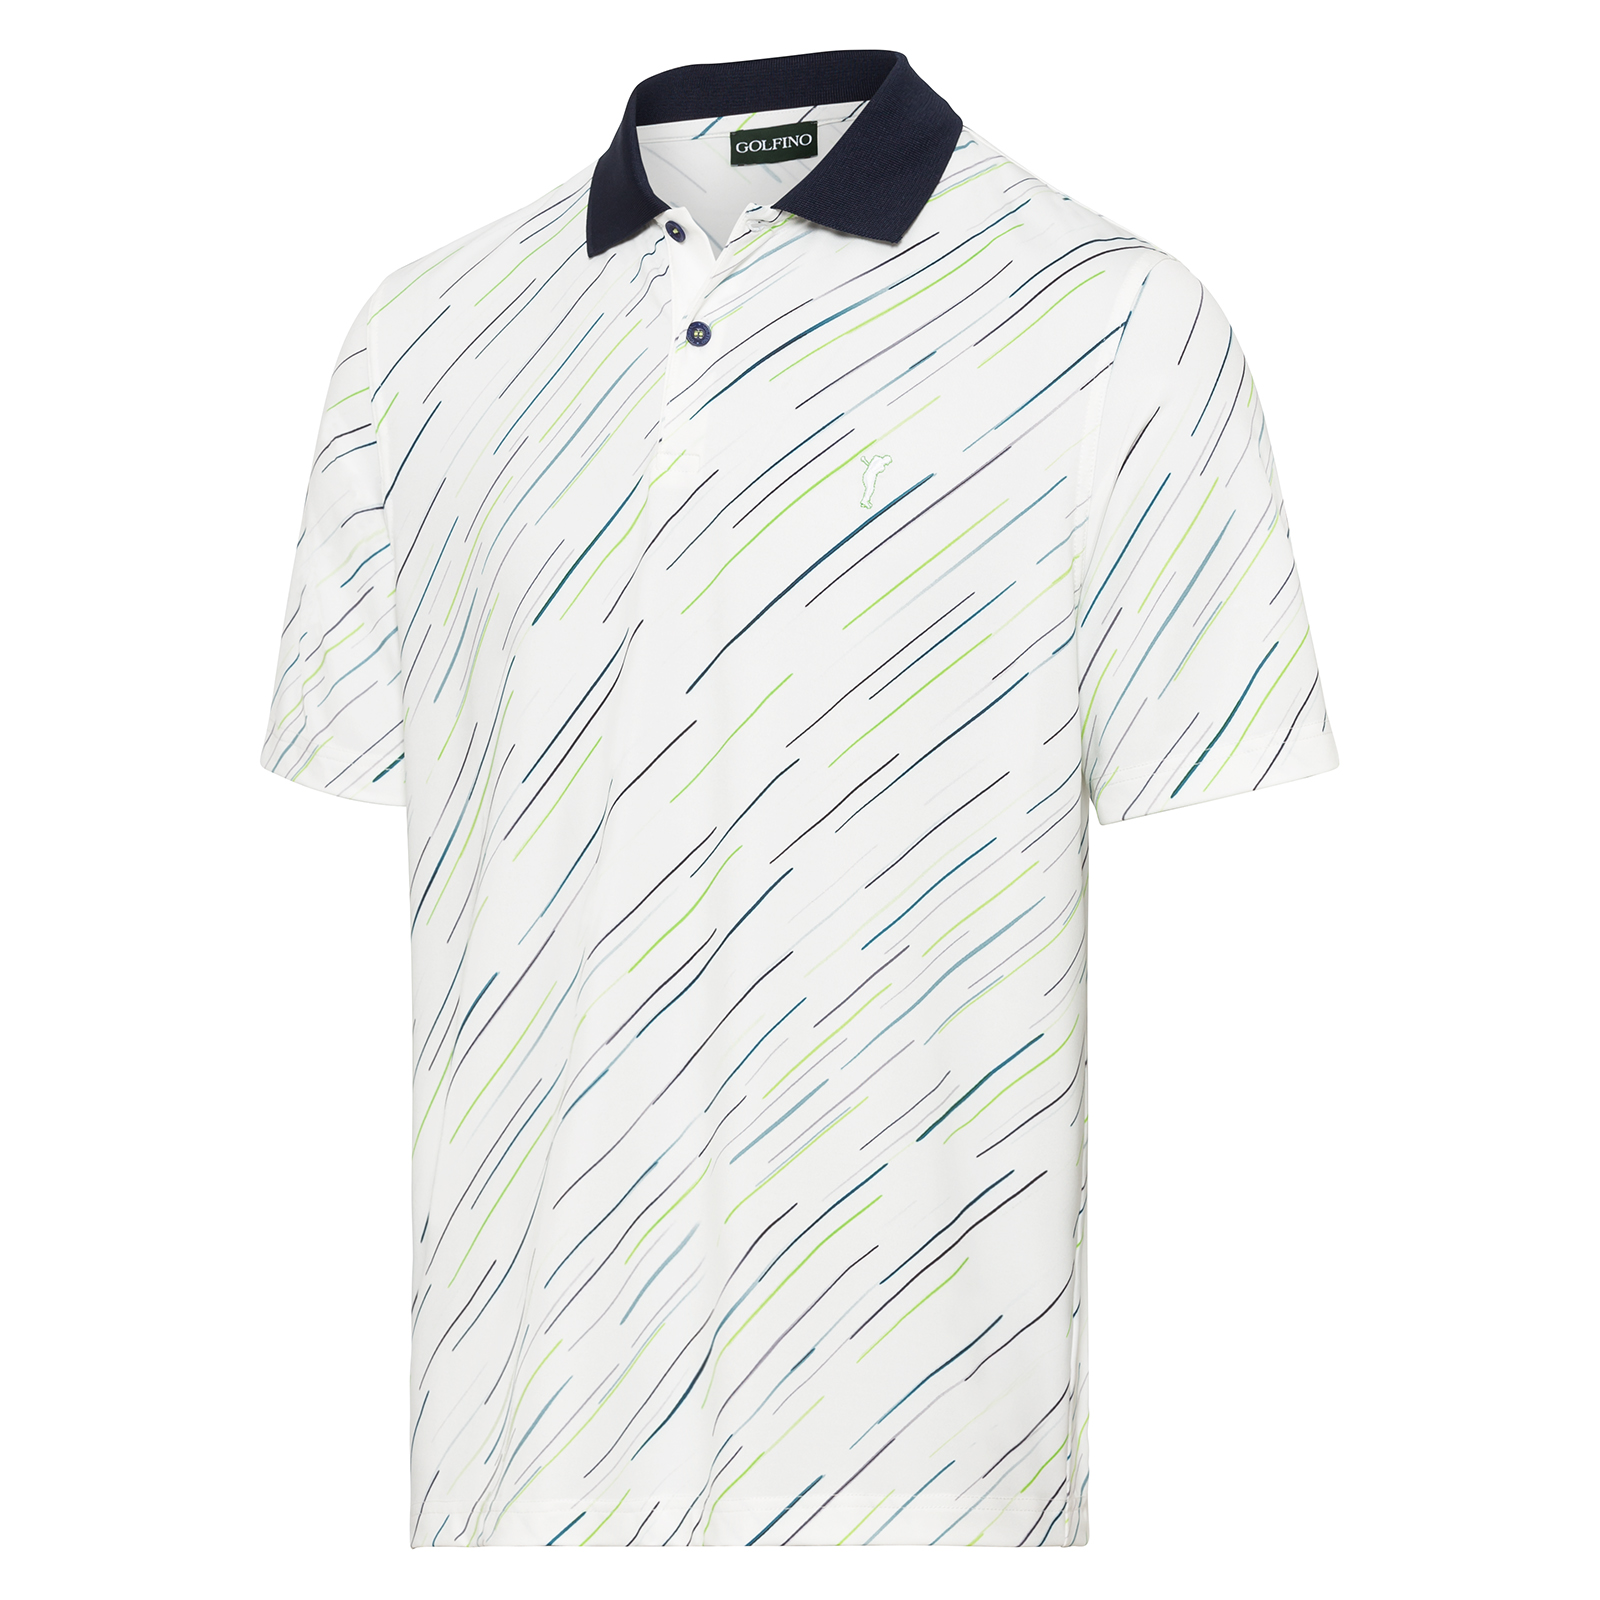 Attractively patterned men's golf polo shirt with stretch function